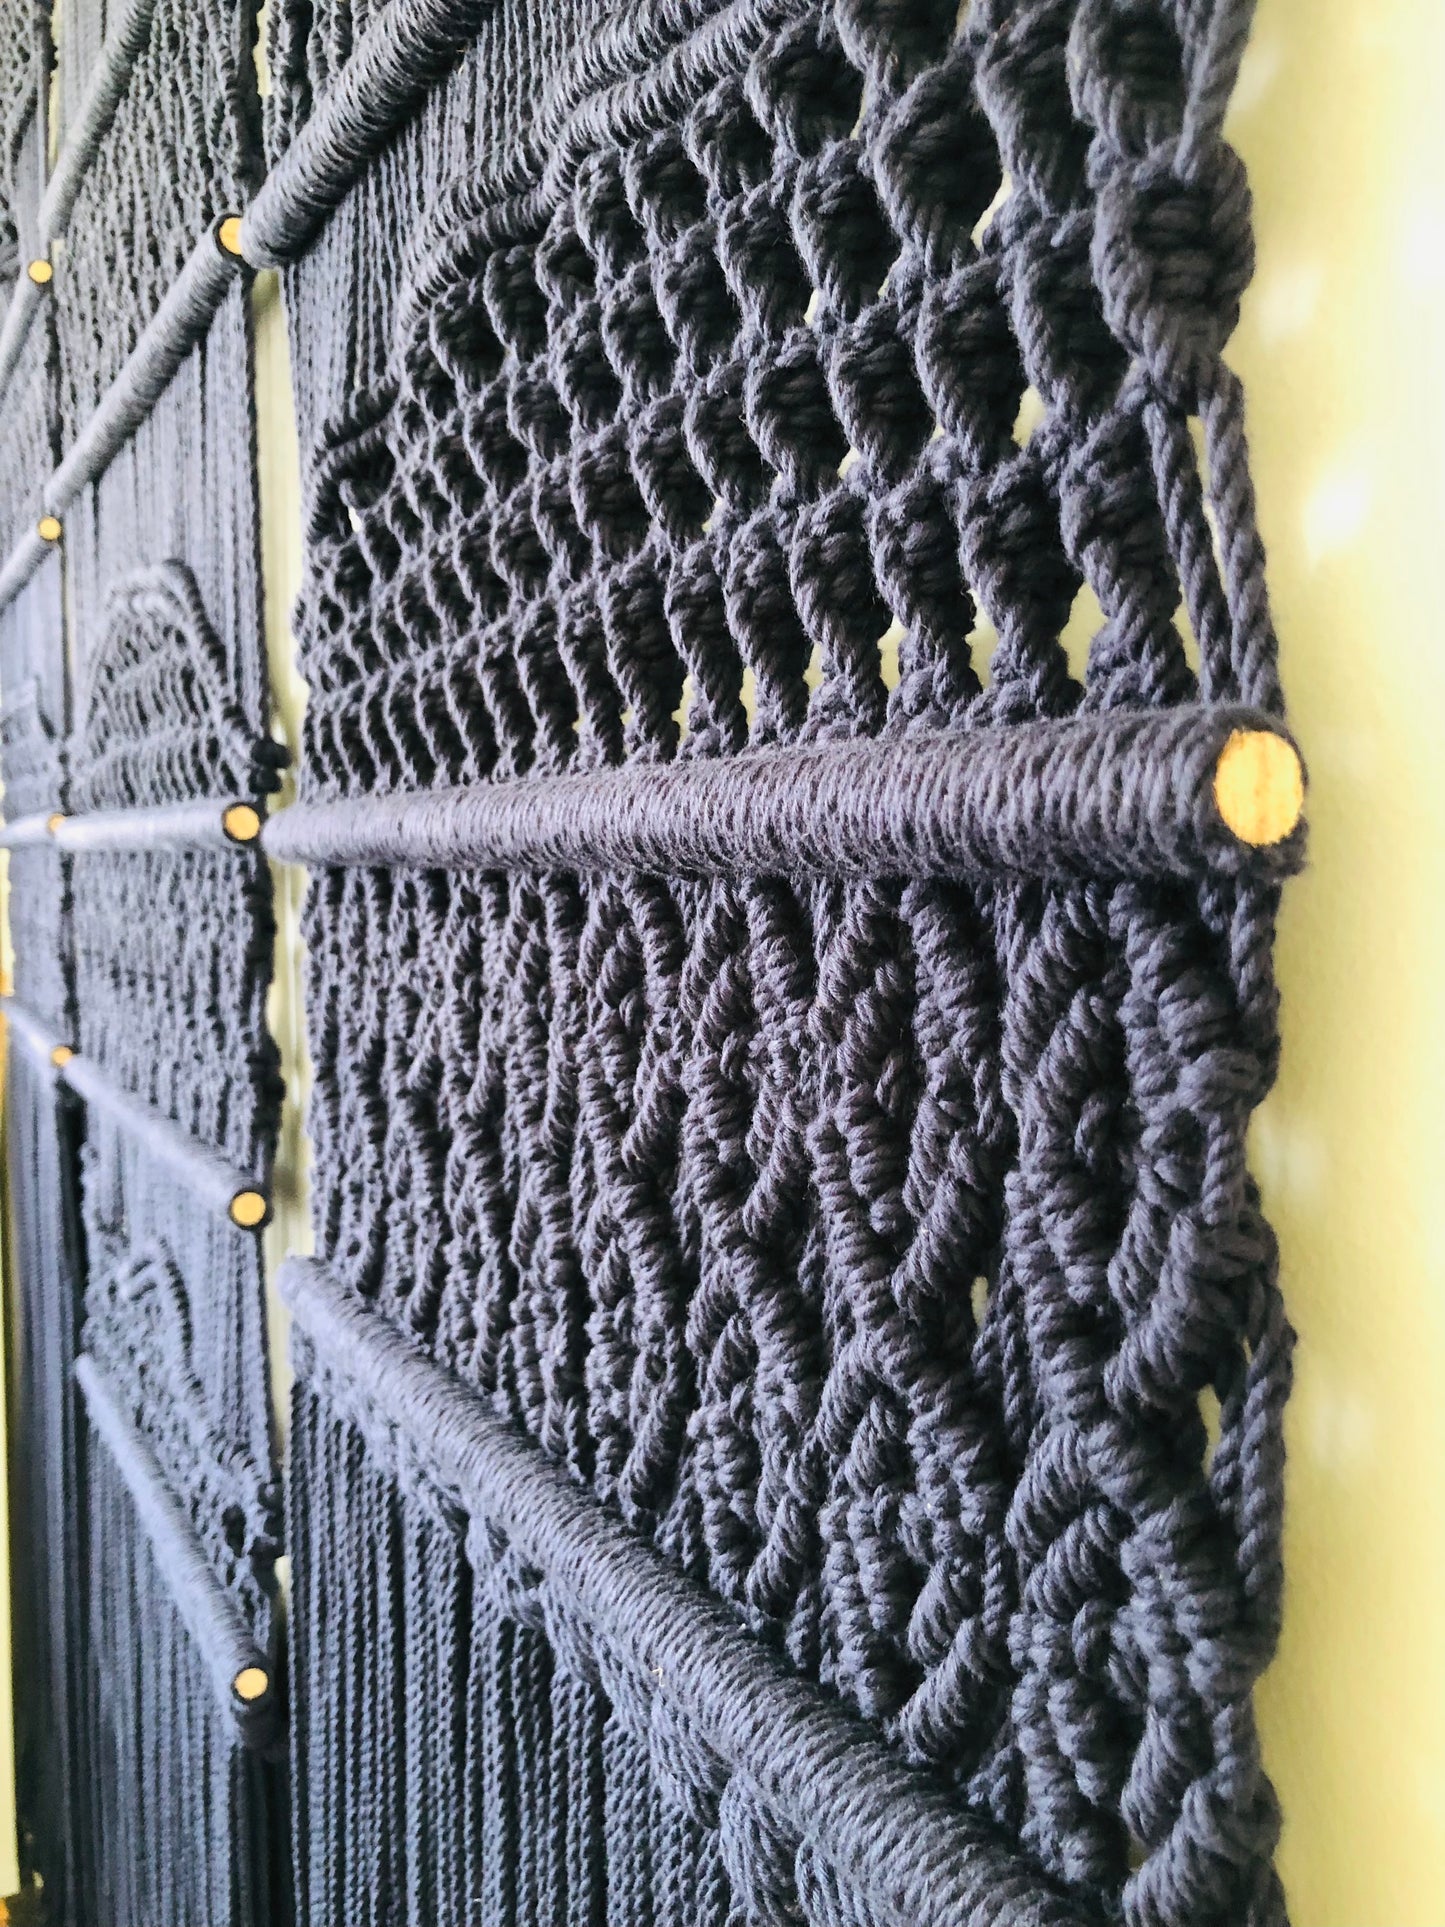 Super Sized Macrame Wall Hanging - Knotted by Hand